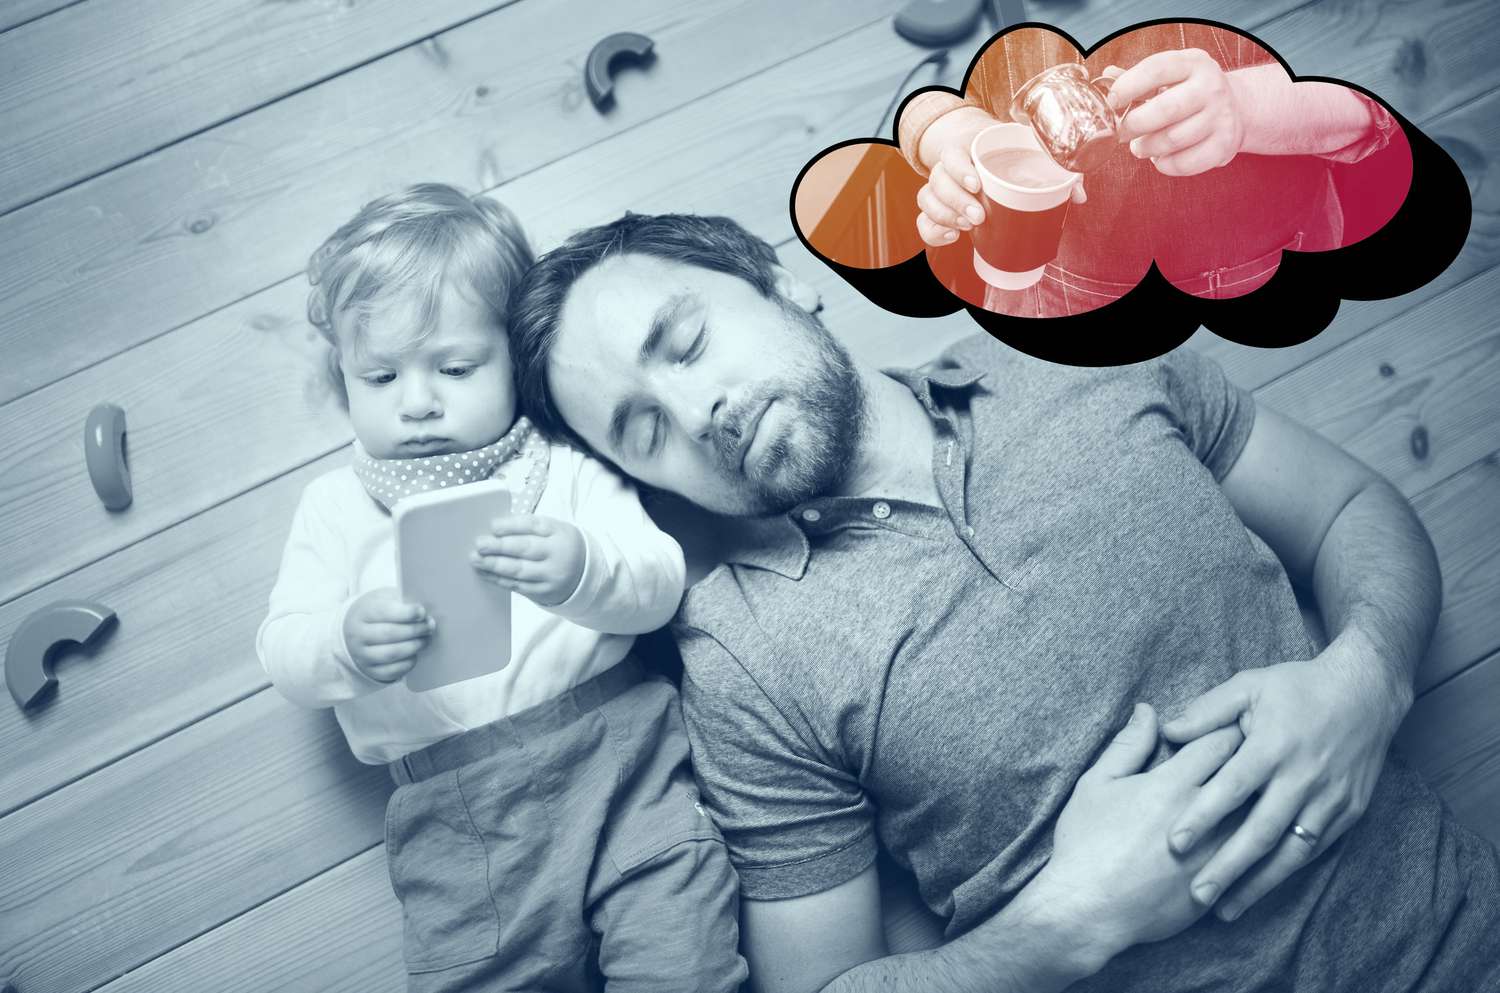 parent who has fallen asleep next to toddler and is dreaming of coffee